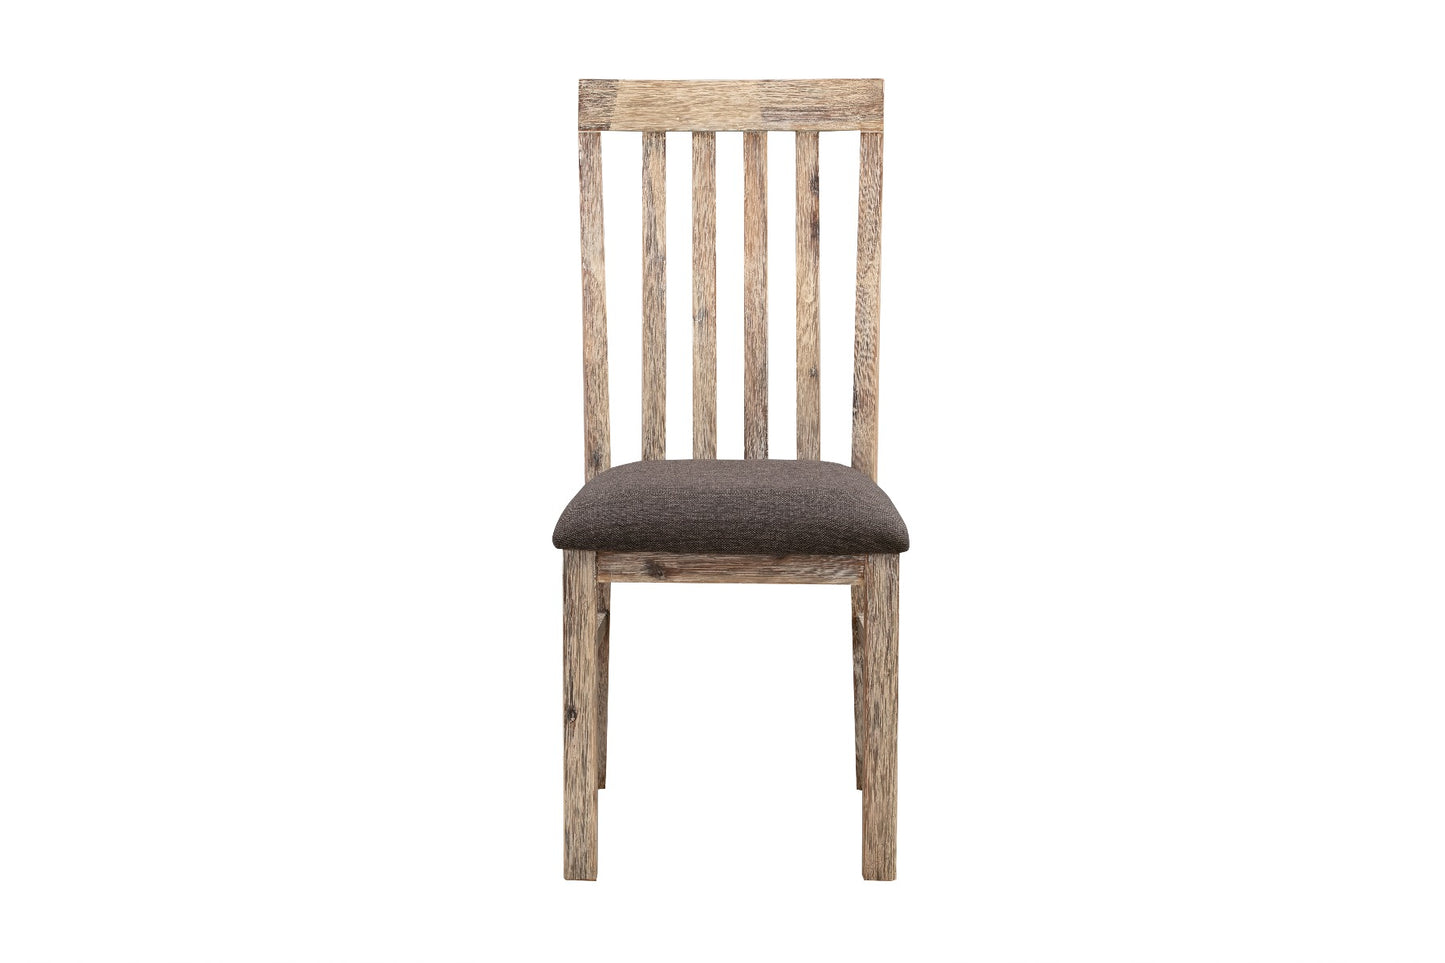 2x Wooden Frame Leatherette in Solid Acacia Wood & Veneer Dining Chairs in Oak Colour - image2